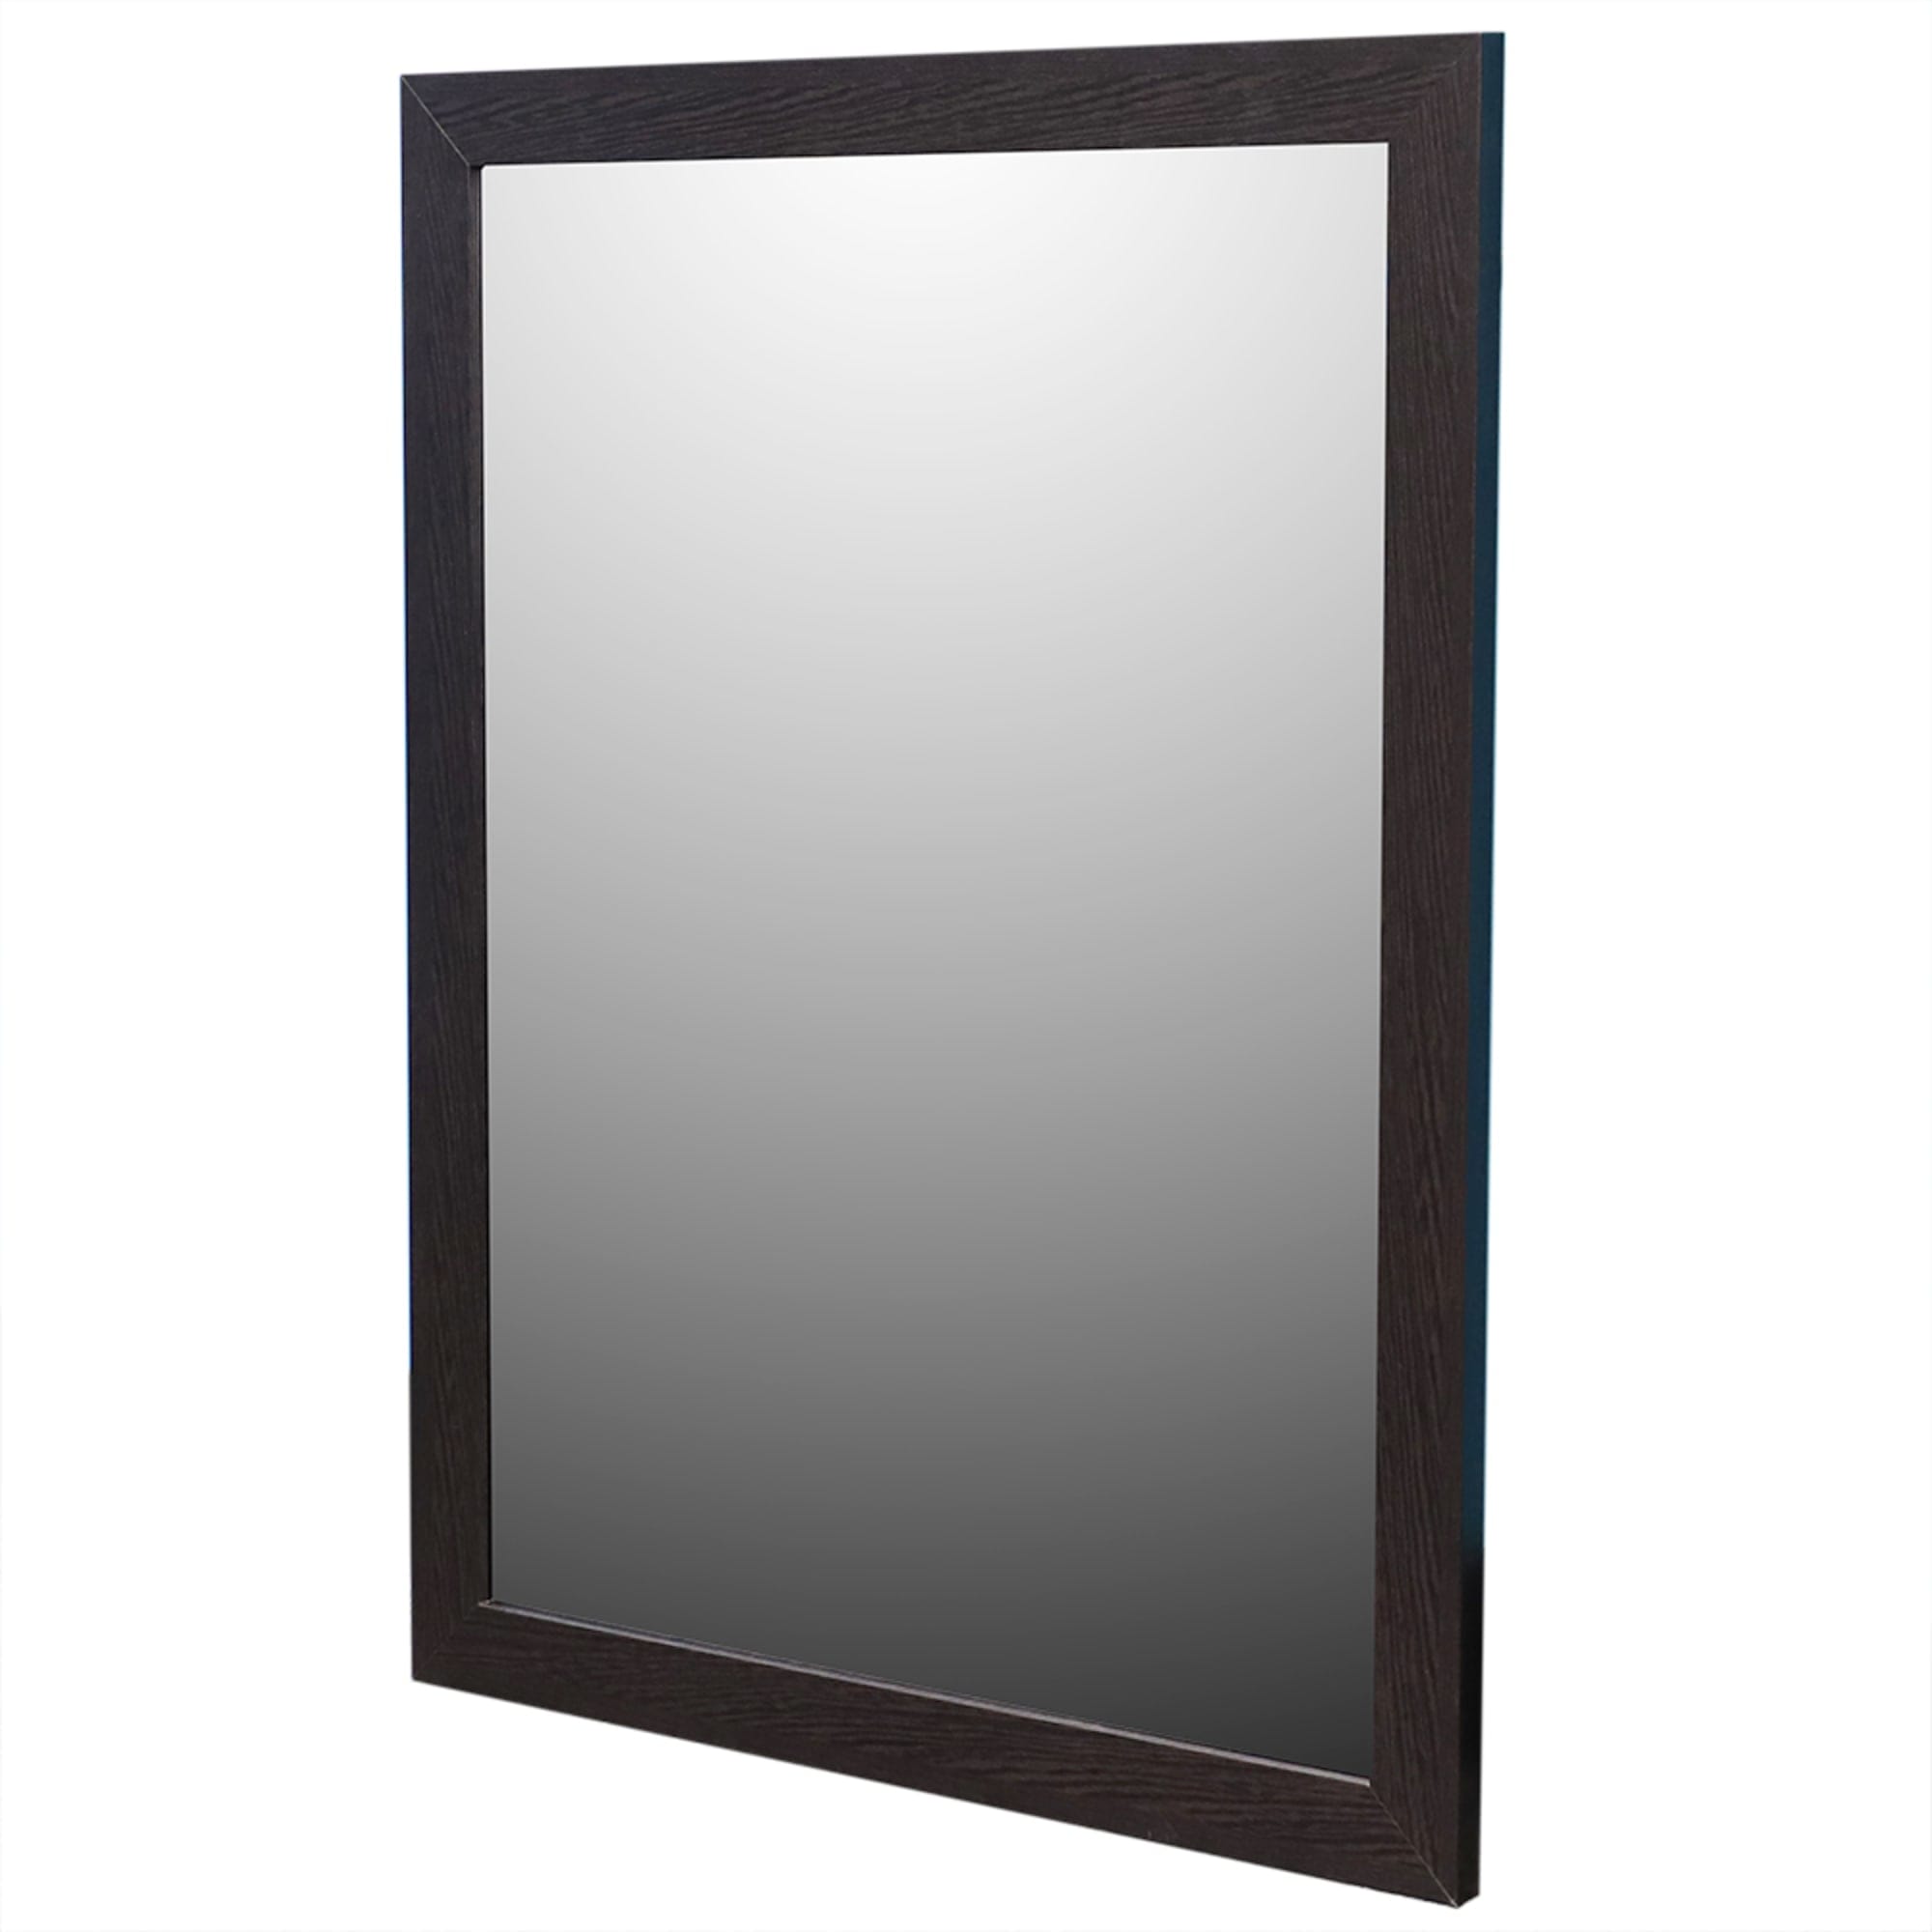 Home Basics Framed Painted MDF 18” x 24” Wall Mirror, Mahogany $10.00 EACH, CASE PACK OF 6